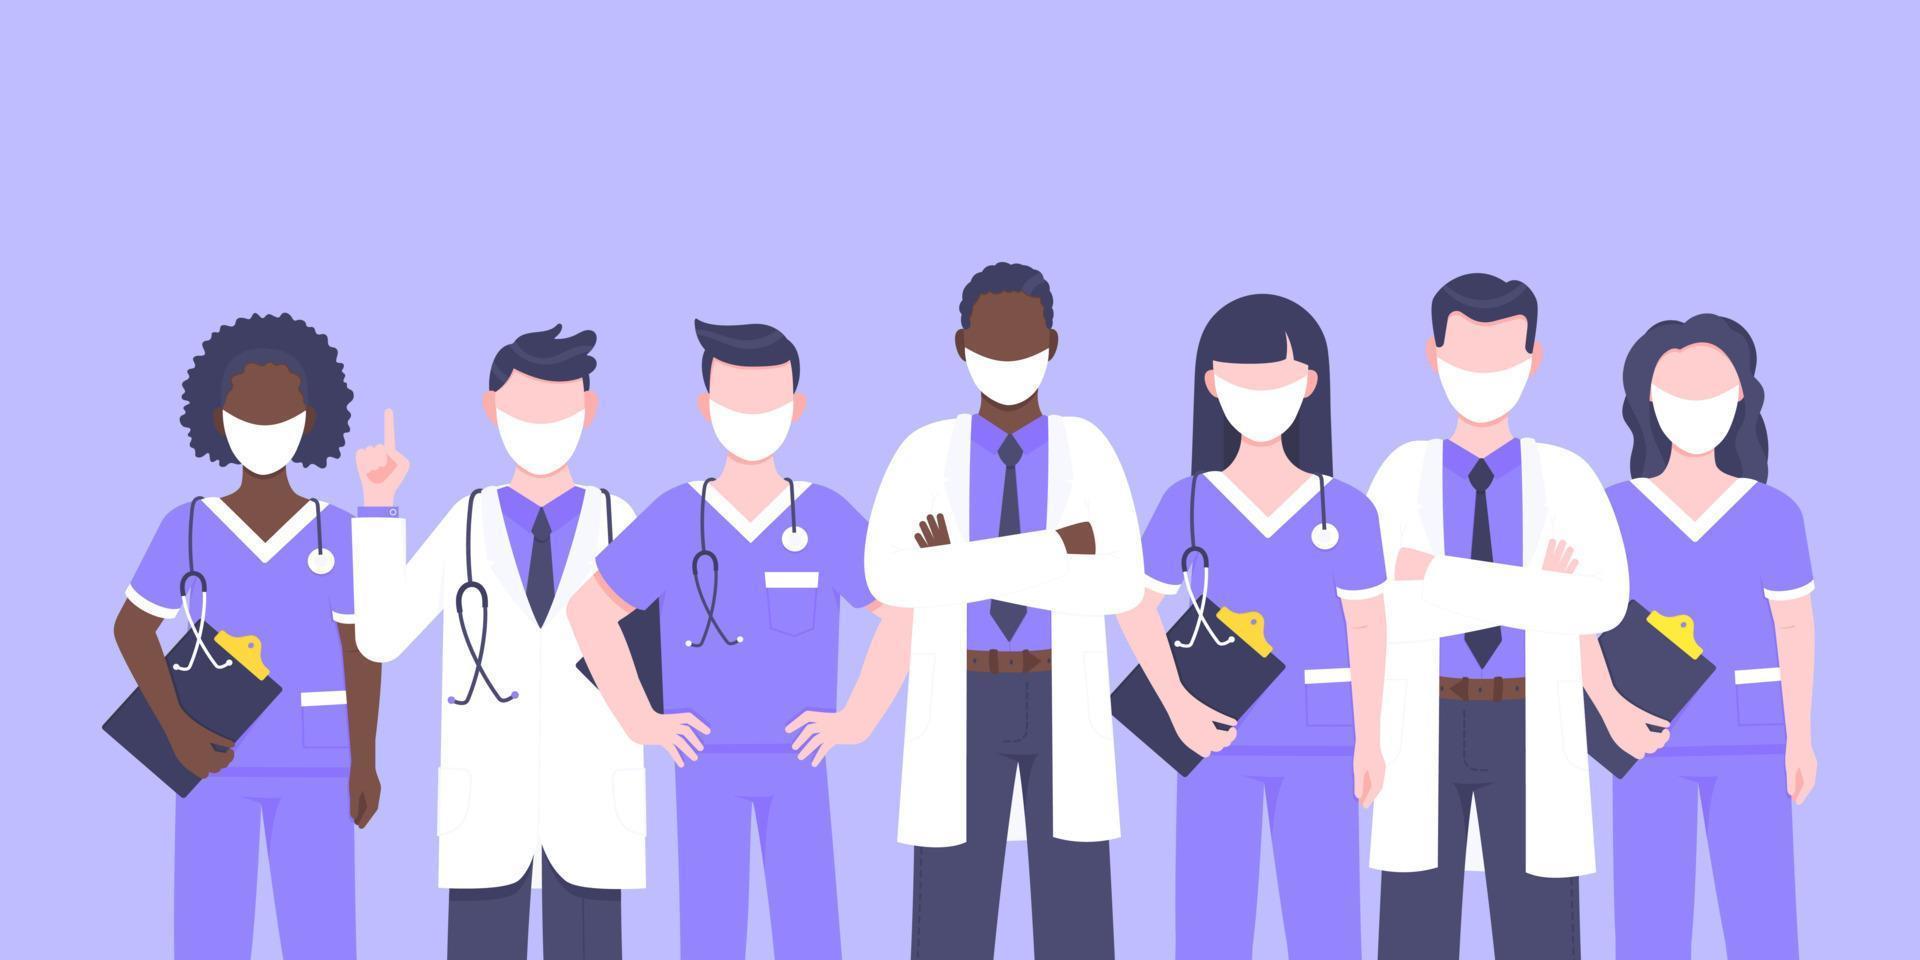 Doctor team medical staff with face masks clinic employee vector illustration.